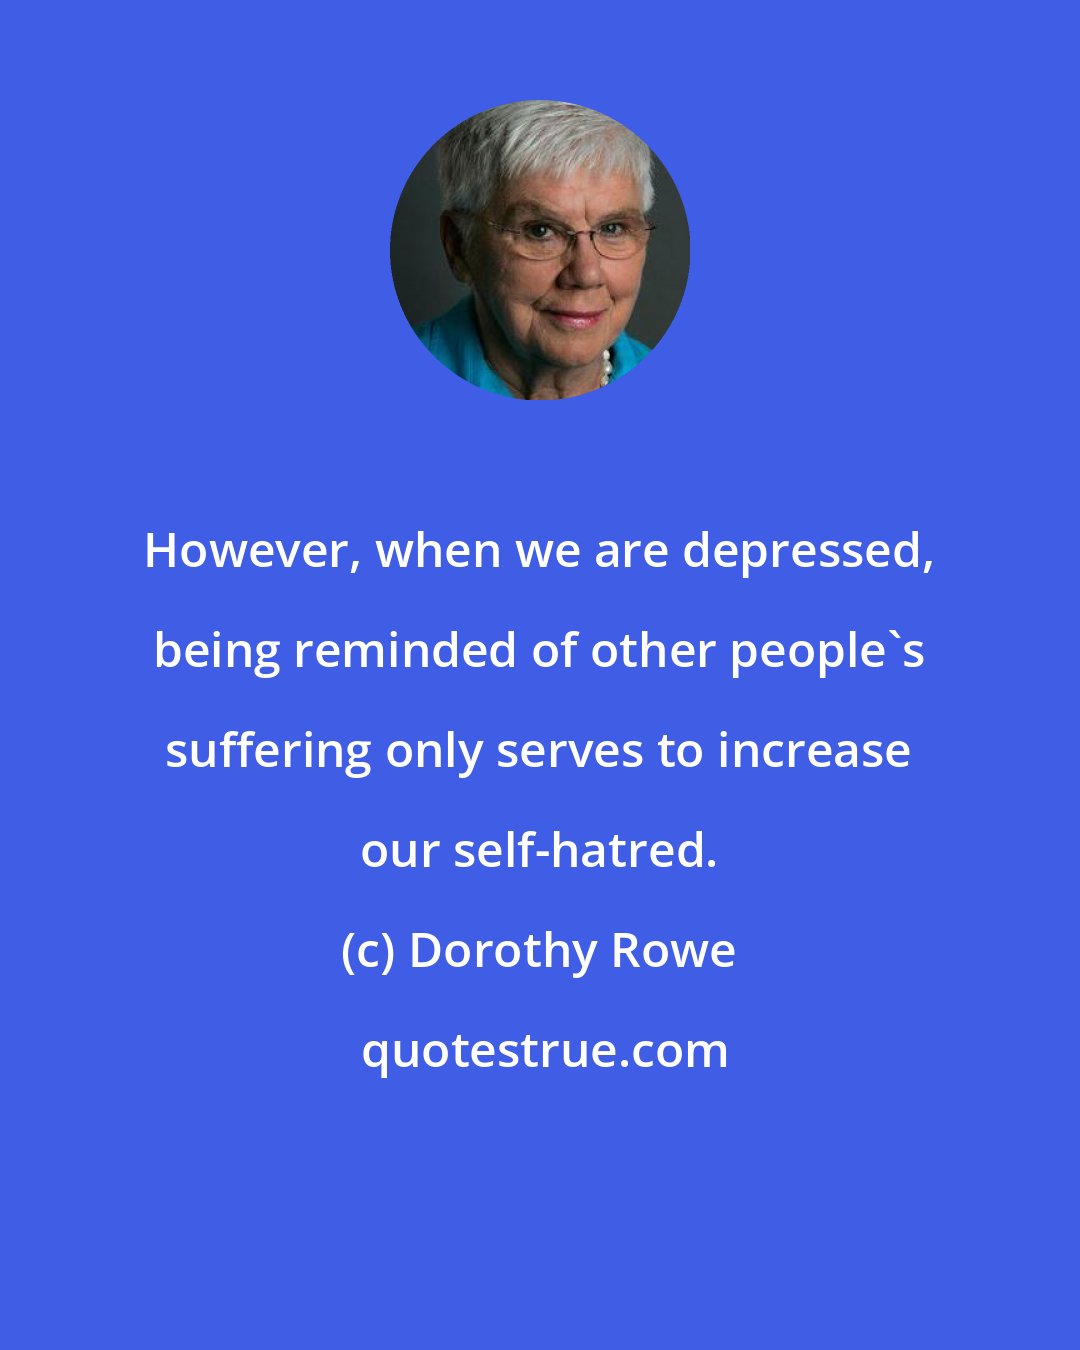 Dorothy Rowe: However, when we are depressed, being reminded of other people's suffering only serves to increase our self-hatred.